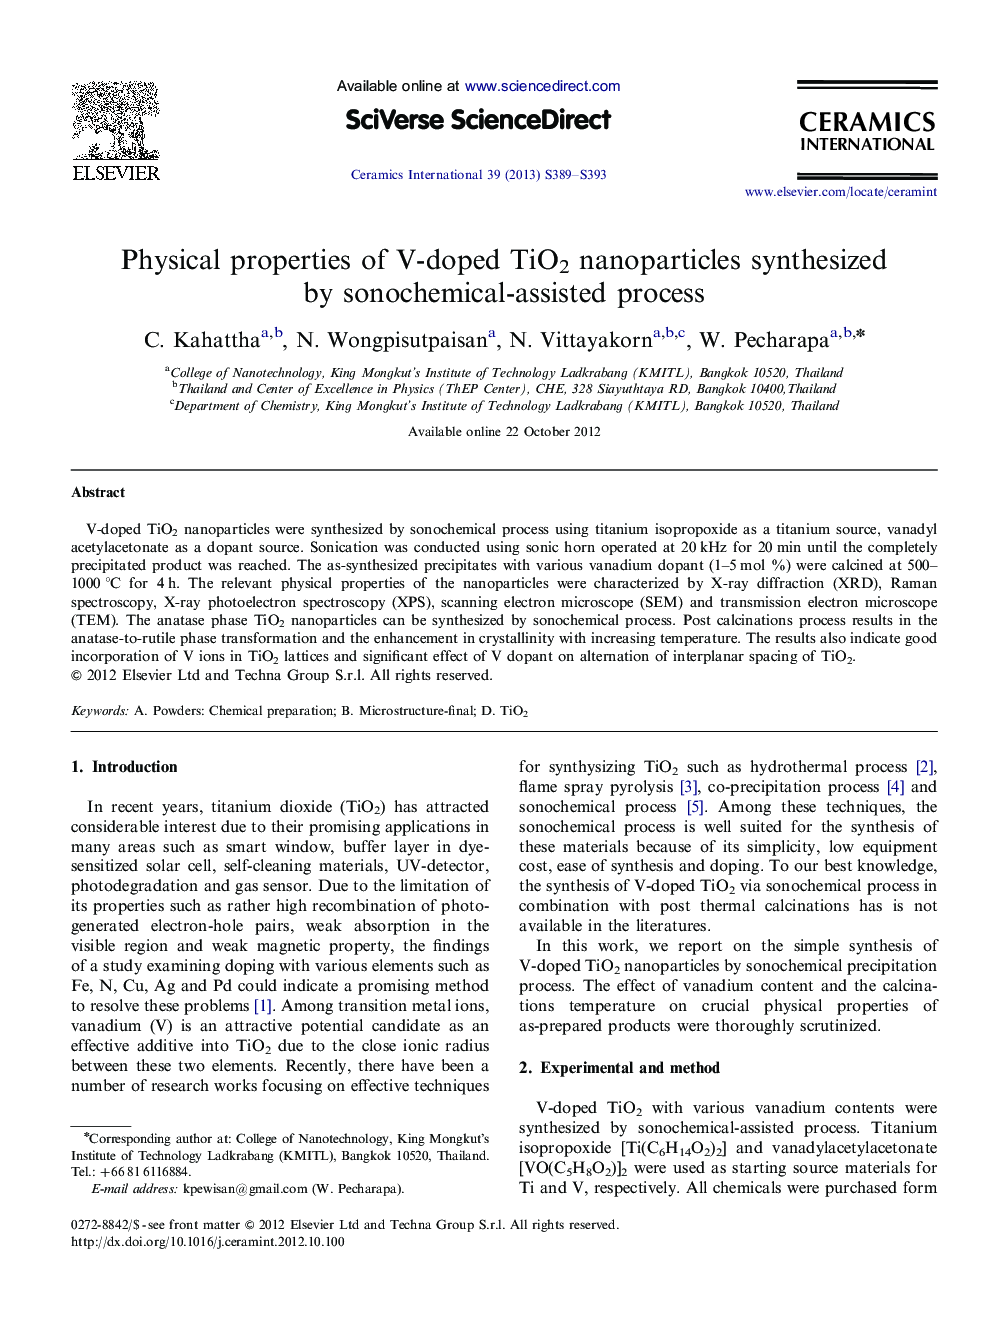 Physical properties of V-doped TiO2 nanoparticles synthesized by sonochemical-assisted process